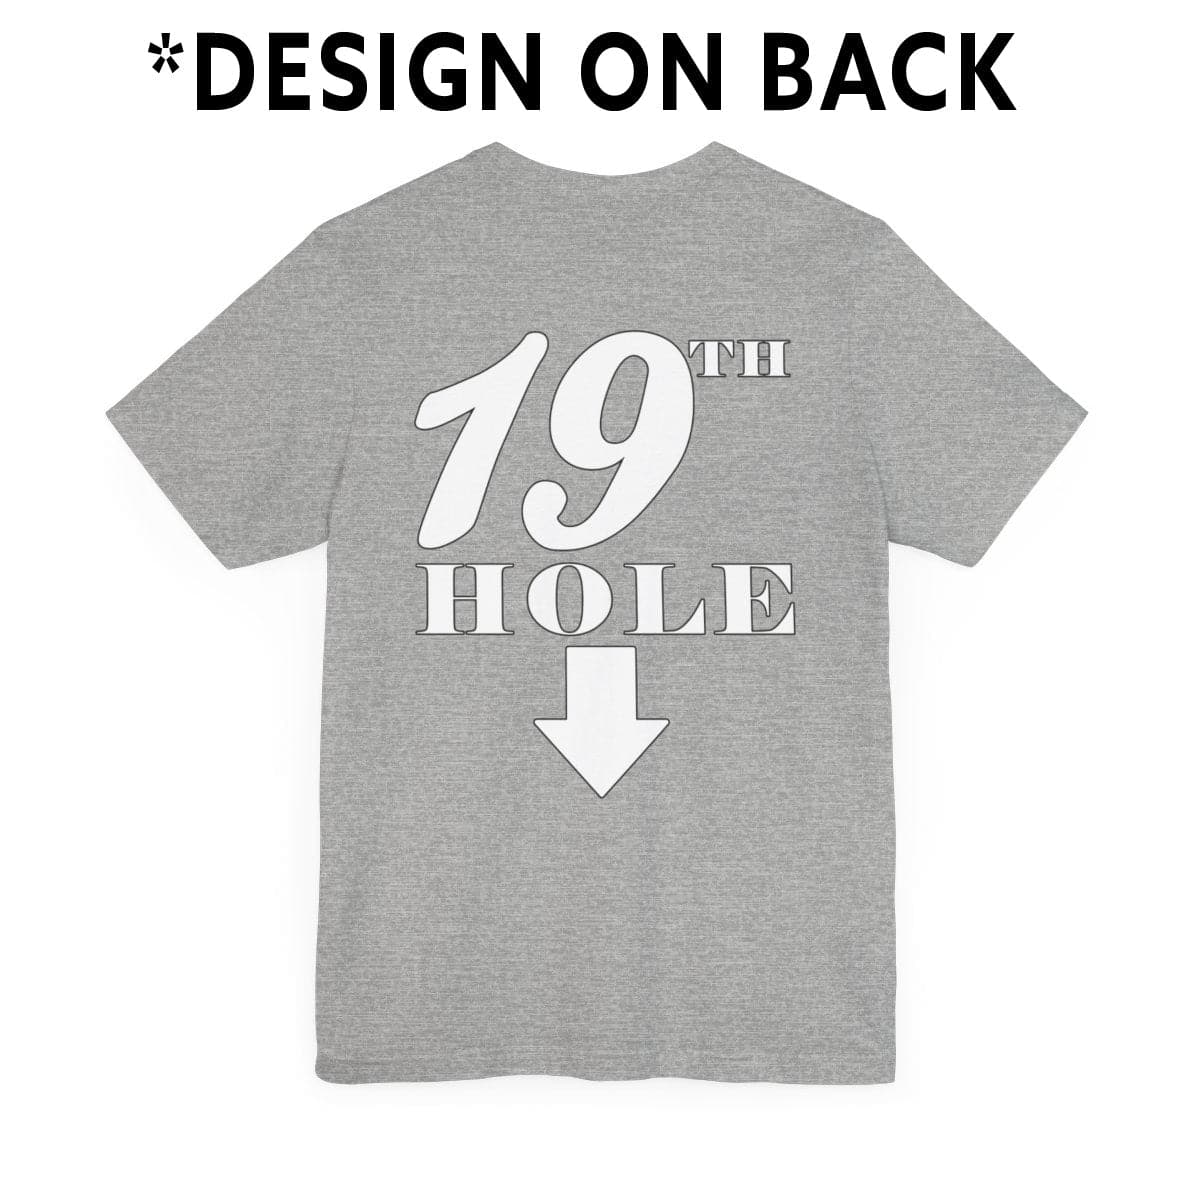 19th Hole - * Print on Back T-shirt in the color: Athletic_Heather - Kaspers Tees